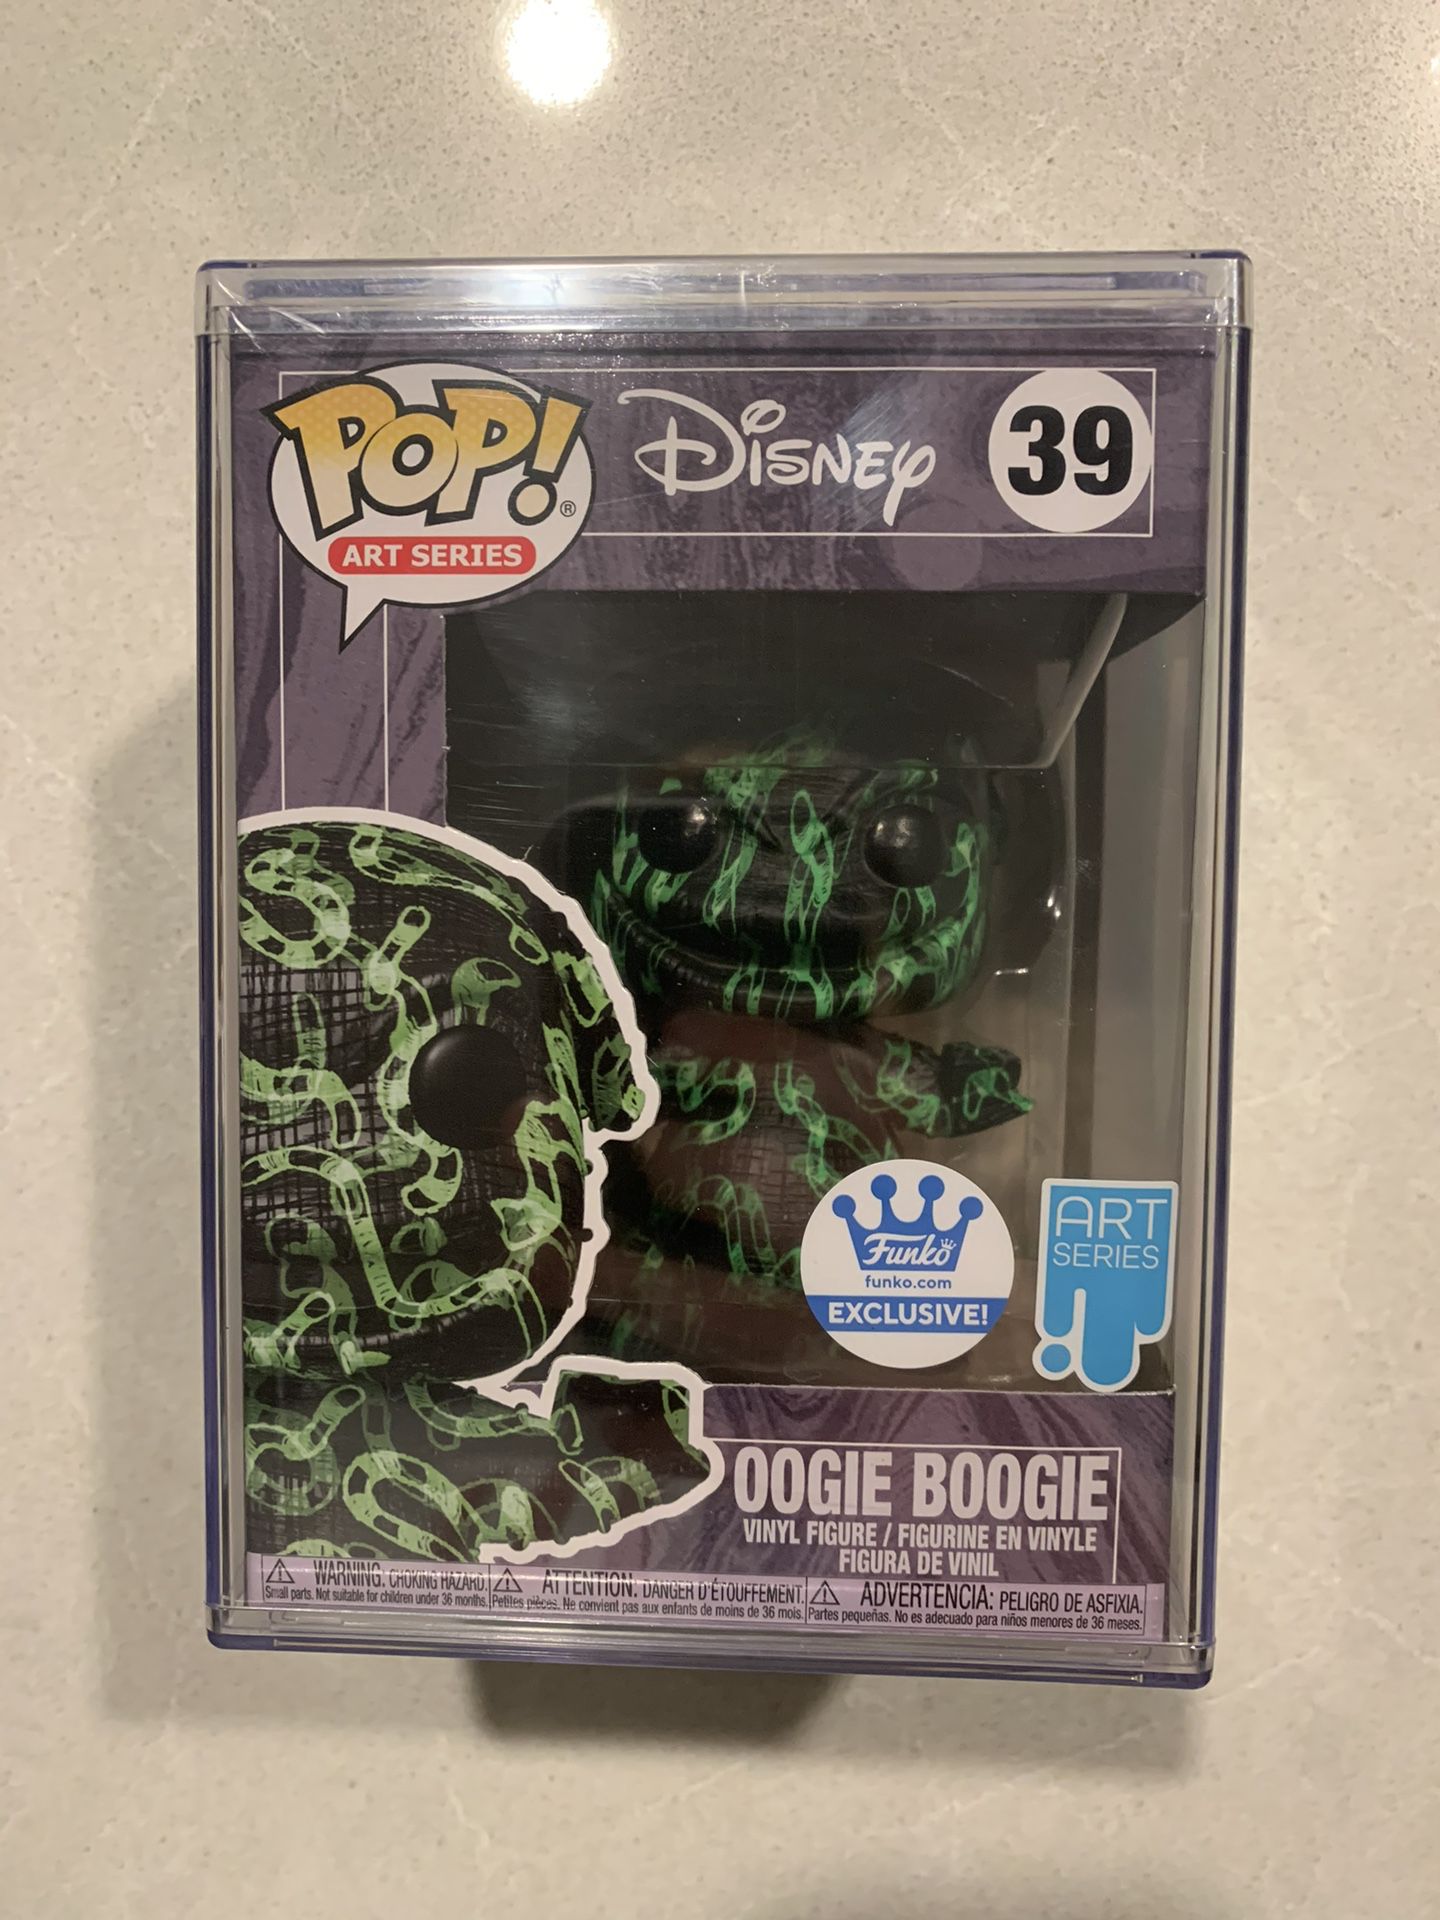 Oogie Boogie Art Series Funko Pop *MINT SEALED* Funko Shop Exclusive Disney Nightmare Before Christmas NBC 39 with Hard Stack protector